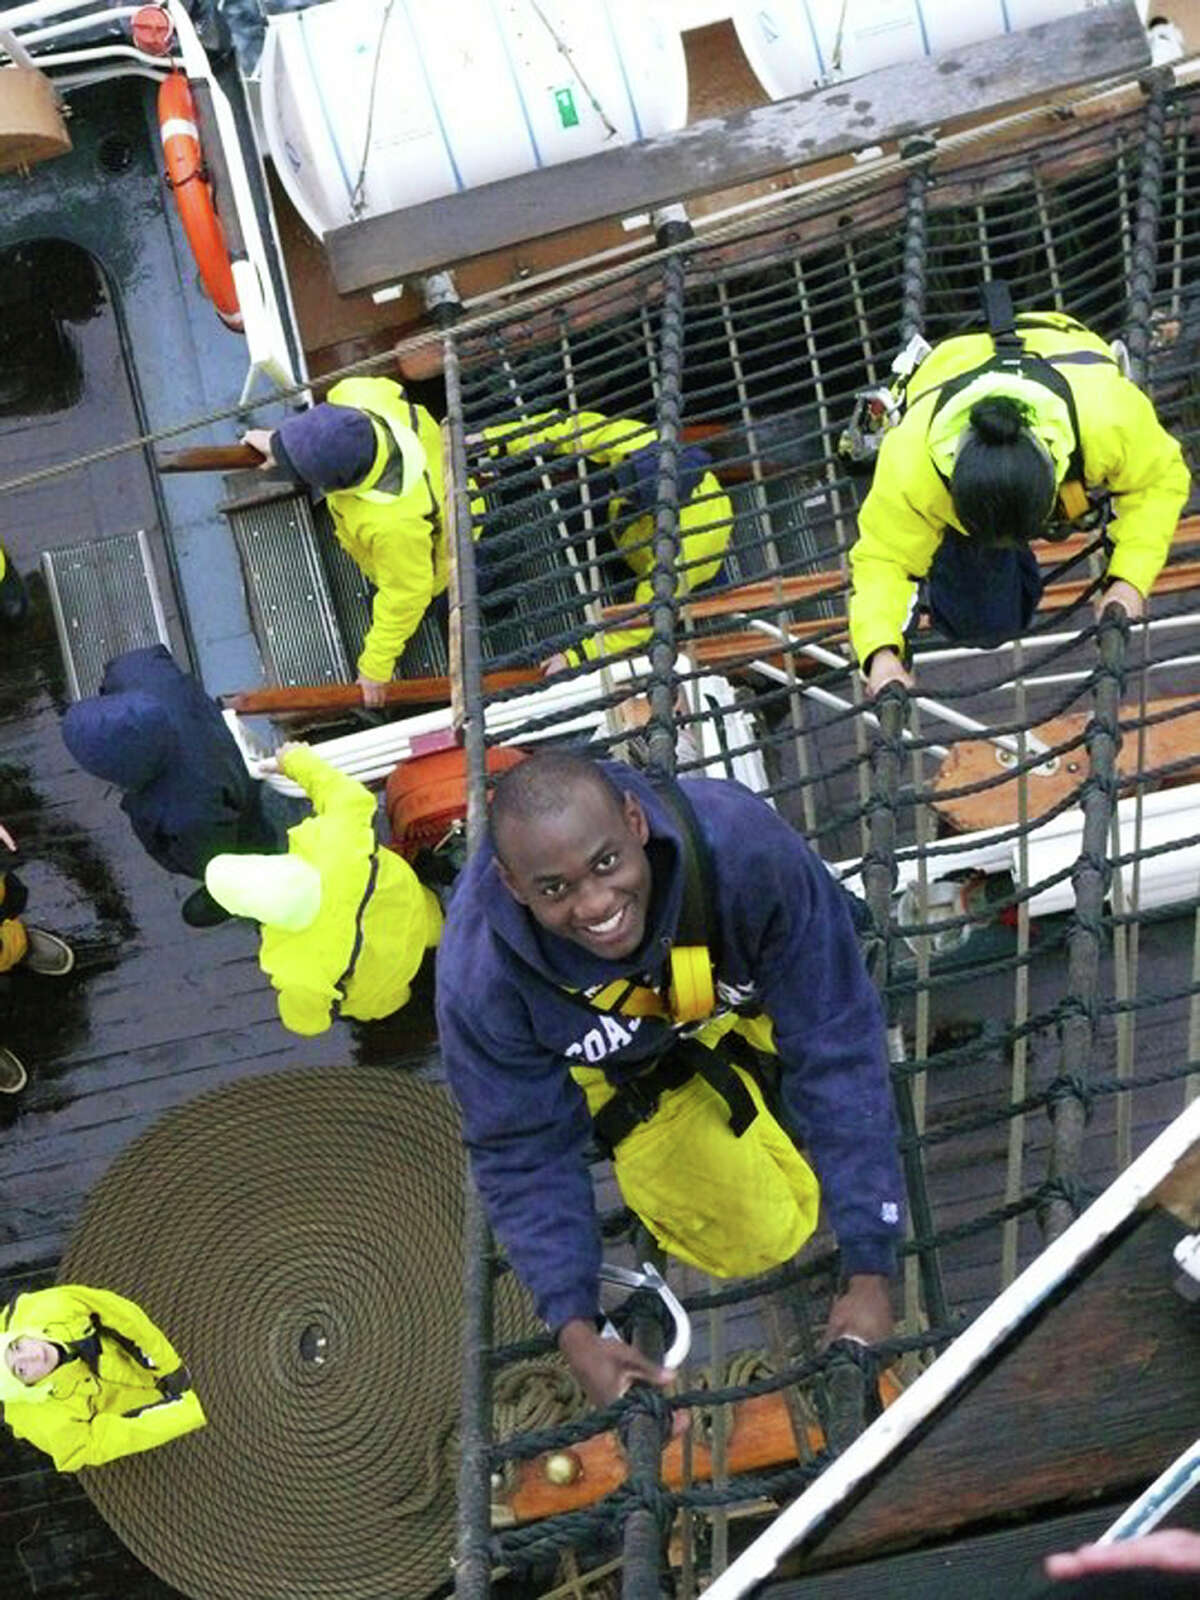 In this May 25, 2011 photo provided by the U.S. Coast Guard, U.S. Coast guard Academy, 1st Class, Cadet Orlando Morel climbs rigging aboard the Coast Guard Cutter Eagle. Morel was 6 years old when he and his mother were rescued by the Coast Guard while leaving Haiti. Morel, now of Rockville, Md., will graduate Wednesday, May 16, 2012, from the Coast Guard Academy in New London, Conn. (AP Photo/U.S. Coast Guard Academy)